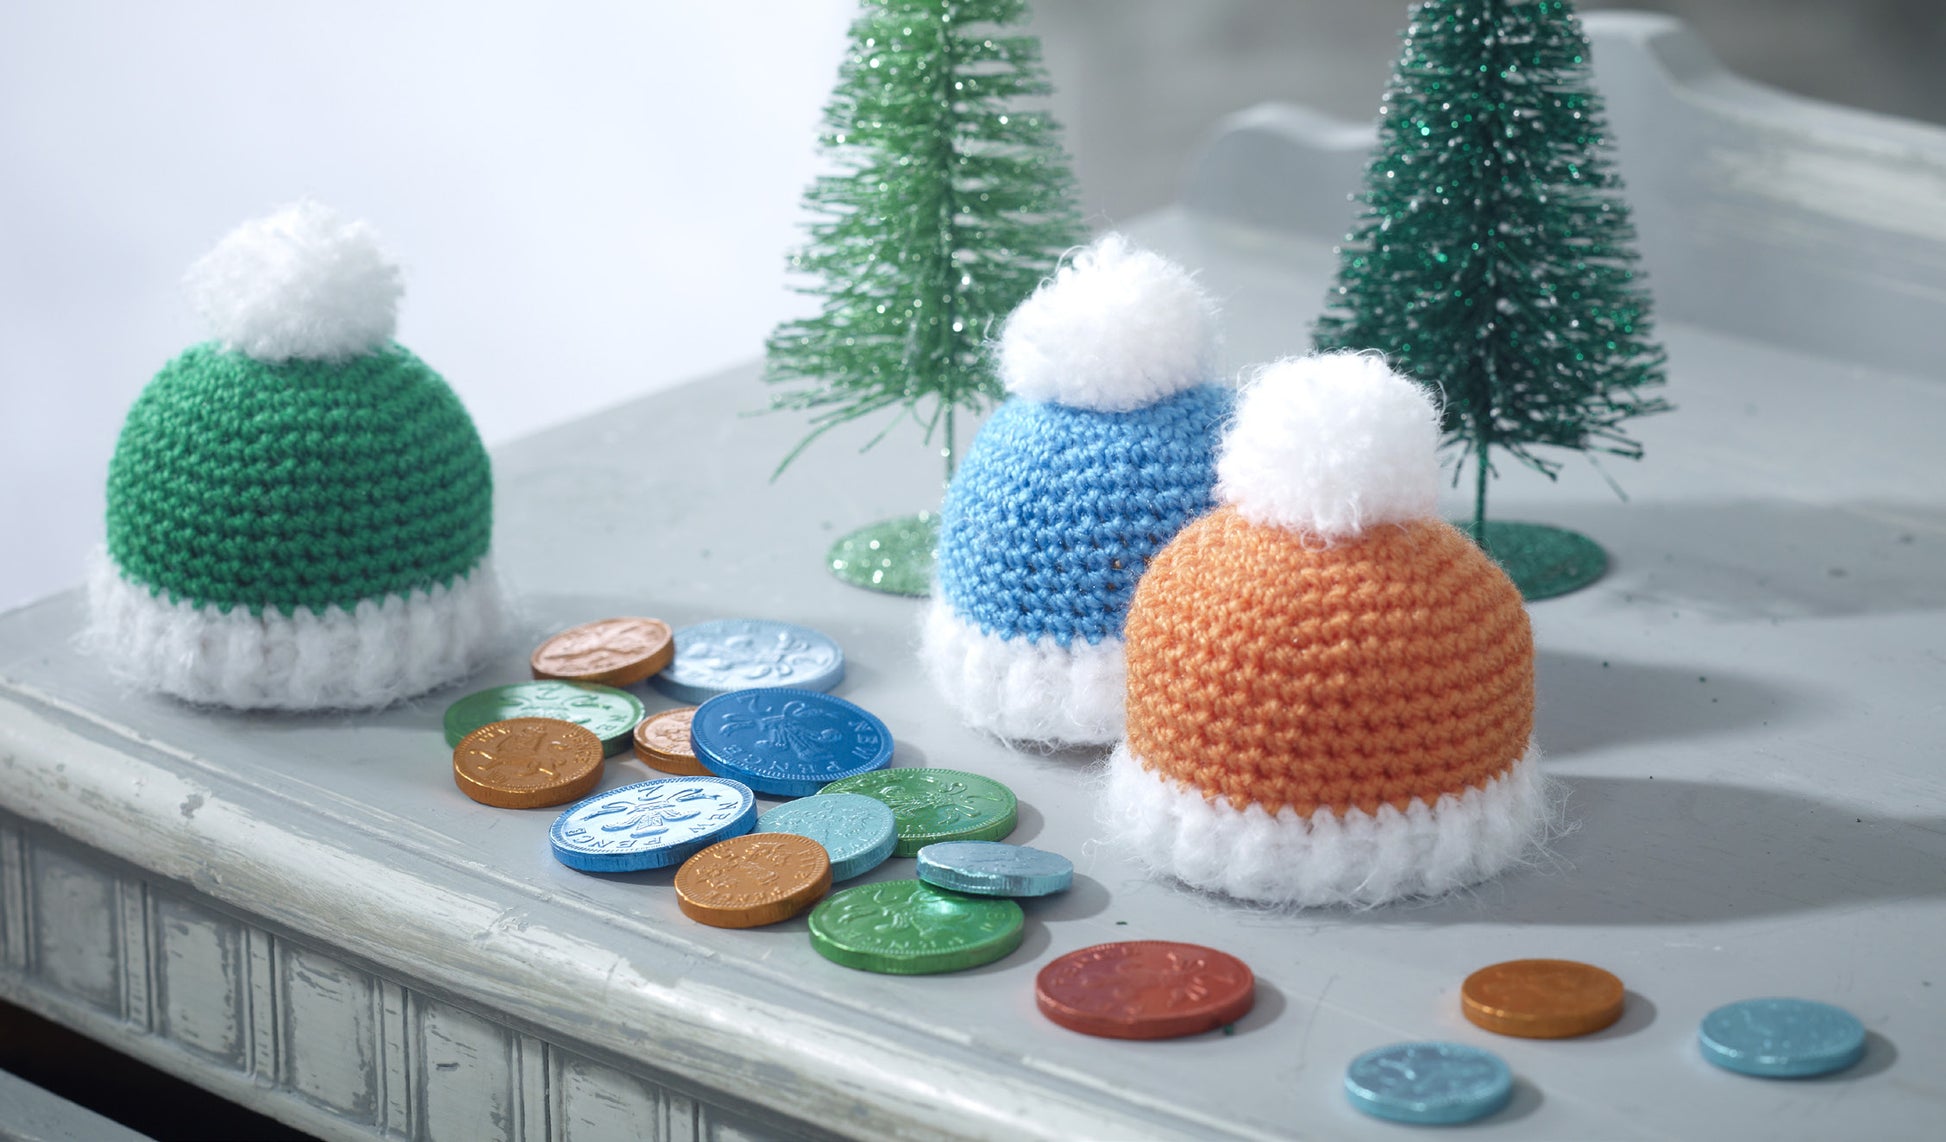 Bobble hat confectionary covers. Little hats perfects to top gifts. In this pattern there is one green, one blue and one orange hat, all with white bobbles and trim. Each hat is approximately 8cm high x 21cm around.